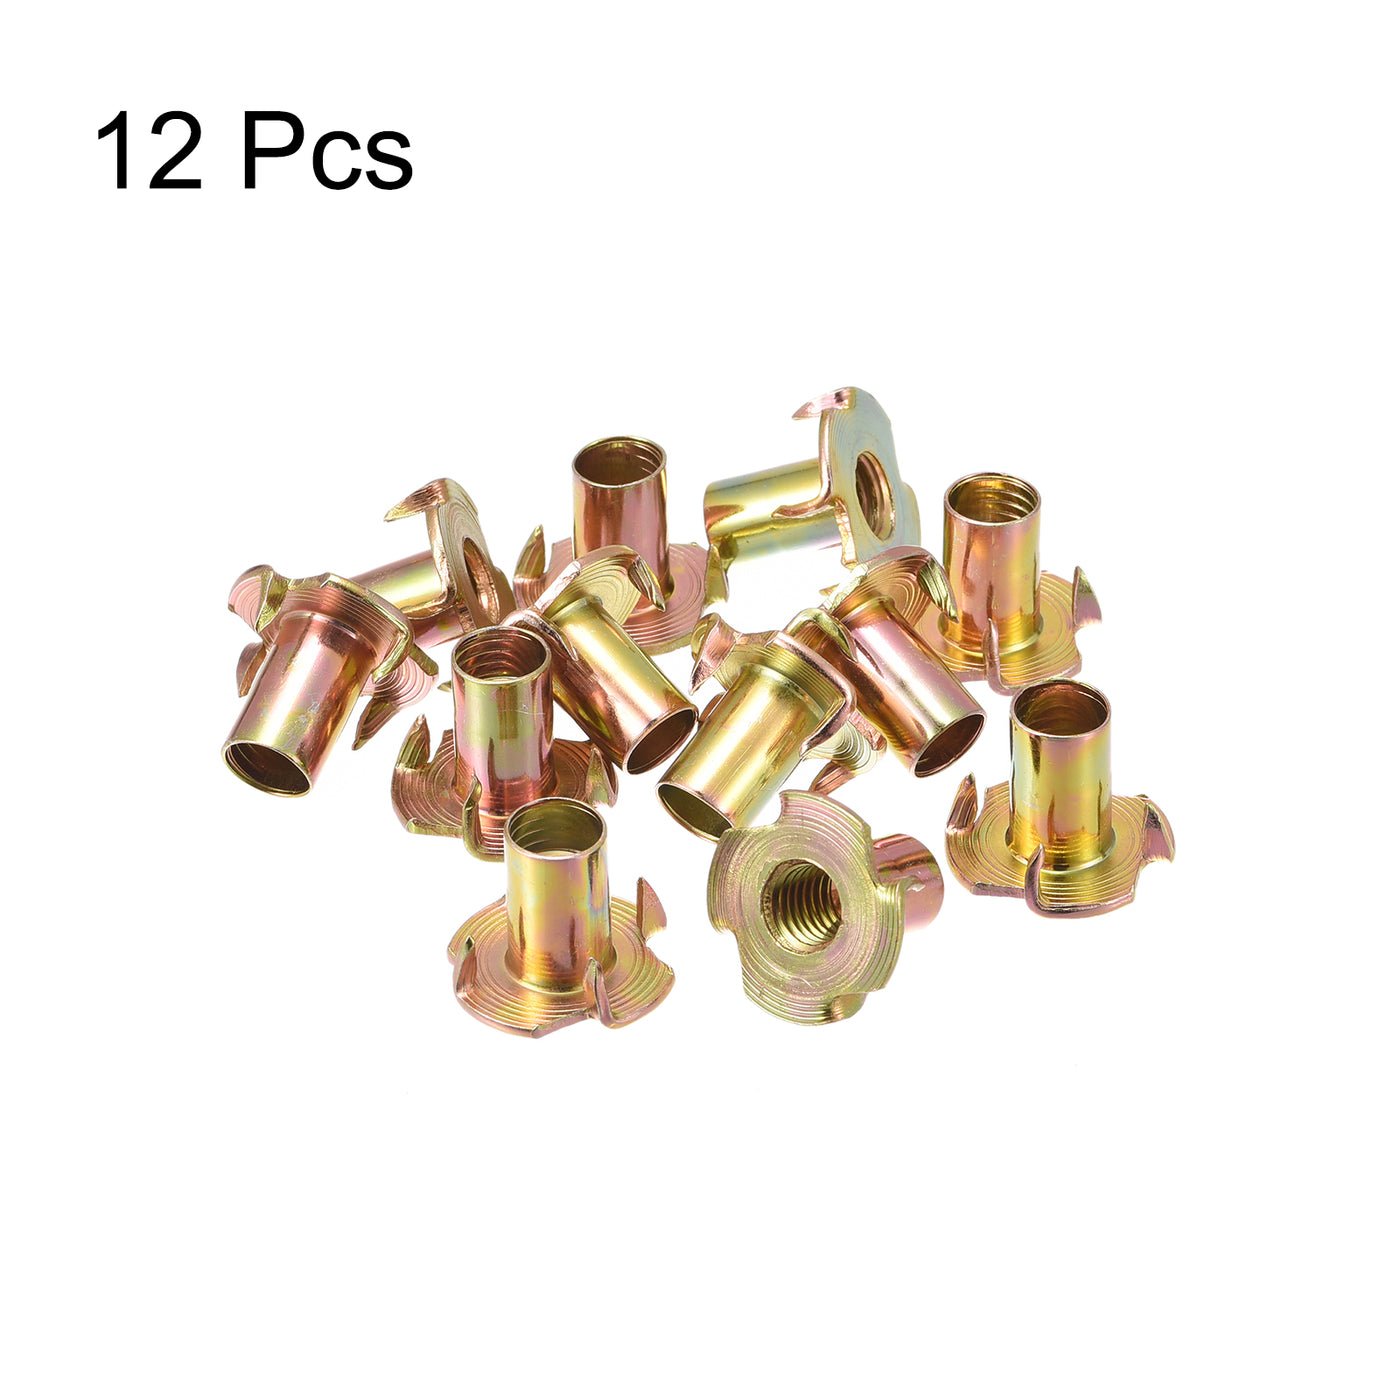 Uxcell Uxcell M8x16mm T-Nuts 4 Pronged Tee Nut Carbon Steel Threaded Inserts for Wood 12pcs